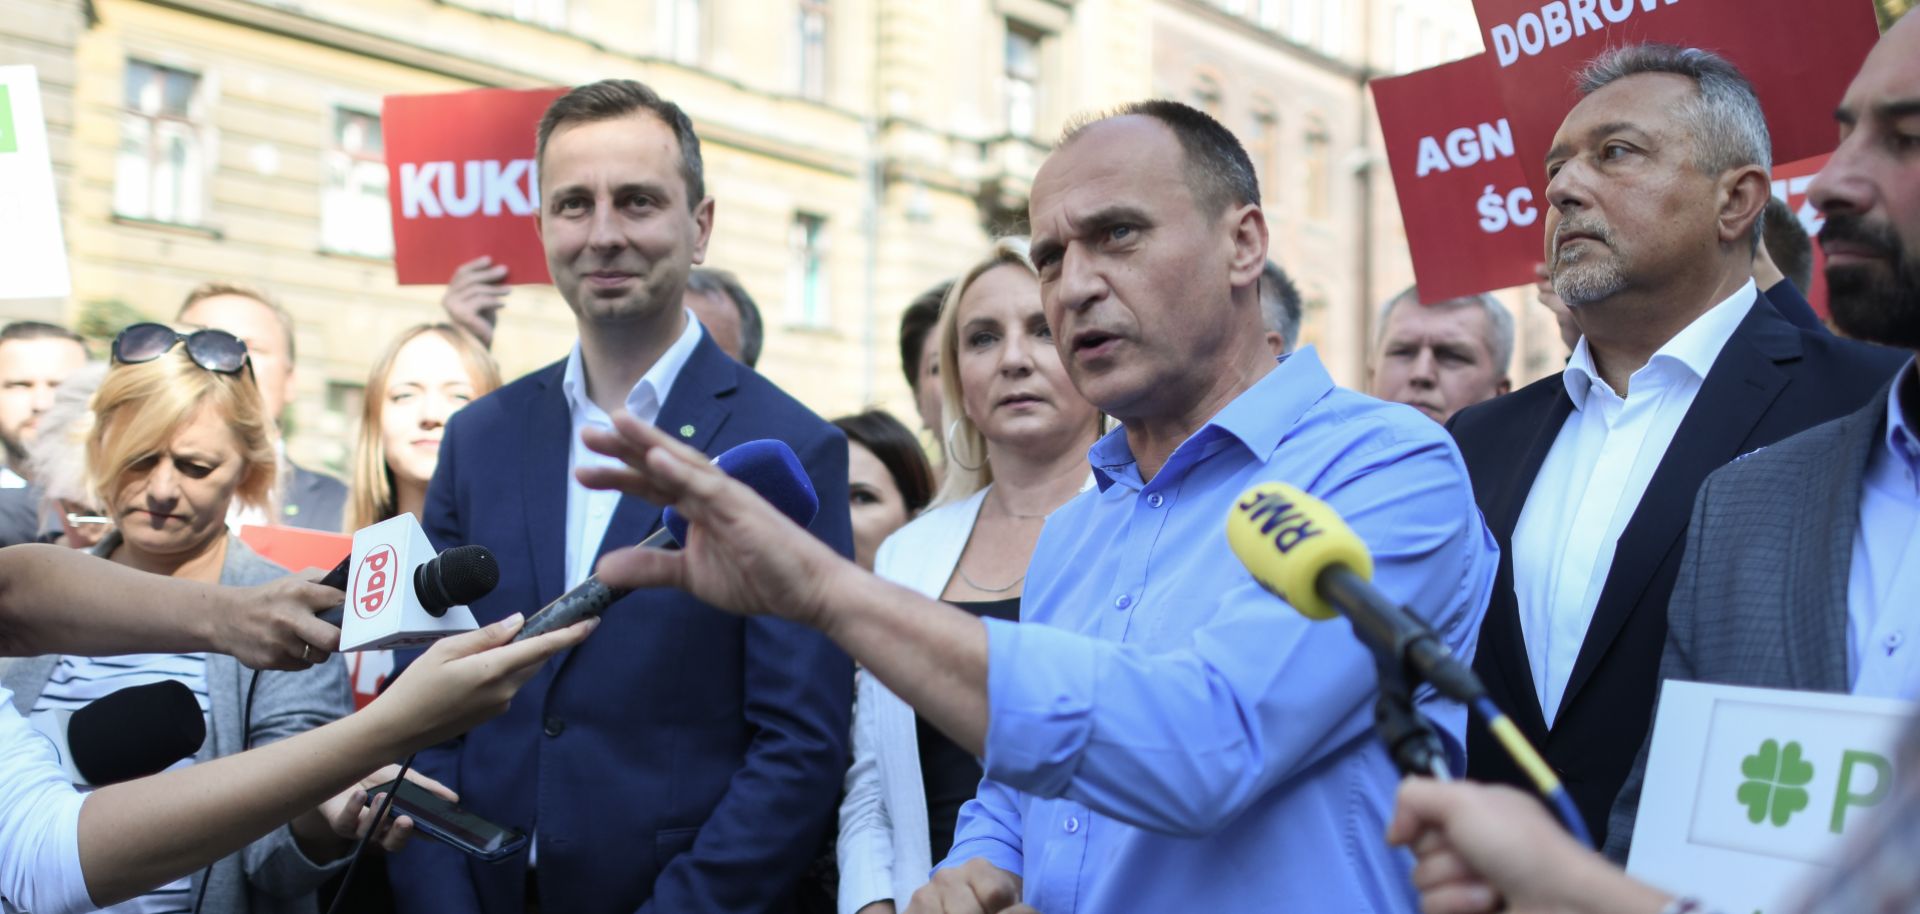 Pawel Kukiz, leader of Poland's Kukiz' 15 party, speaks to the press in Krakow on Sept. 4, 2019, about the Polish Coalition, an alliance between his party and the Polish People's Party formed to compete in Poland's general elections this fall.